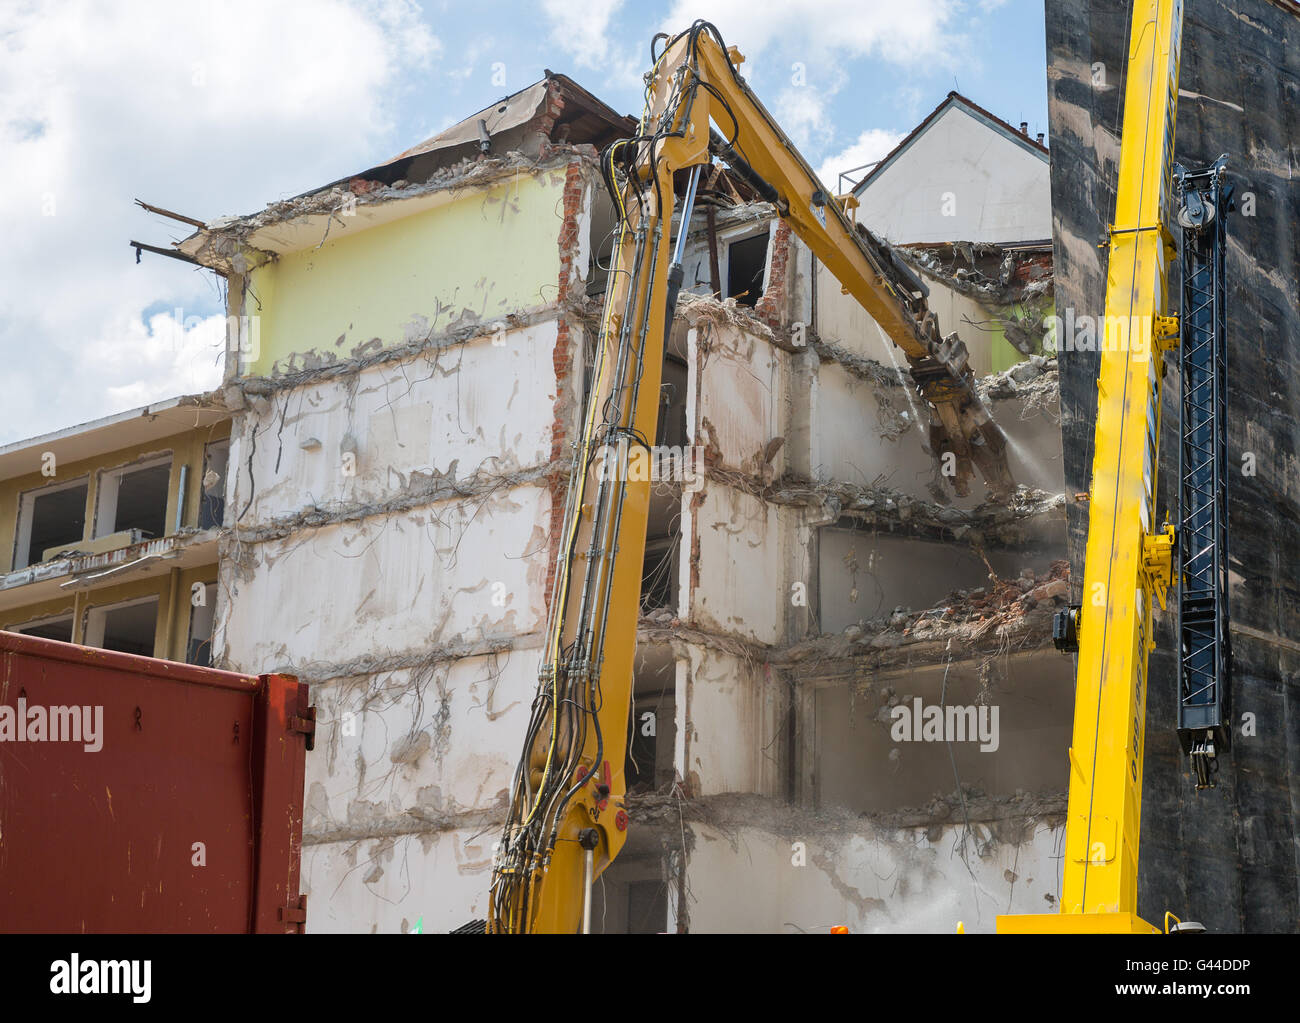 Dismantling of Building crashing by machinery Stock Photo